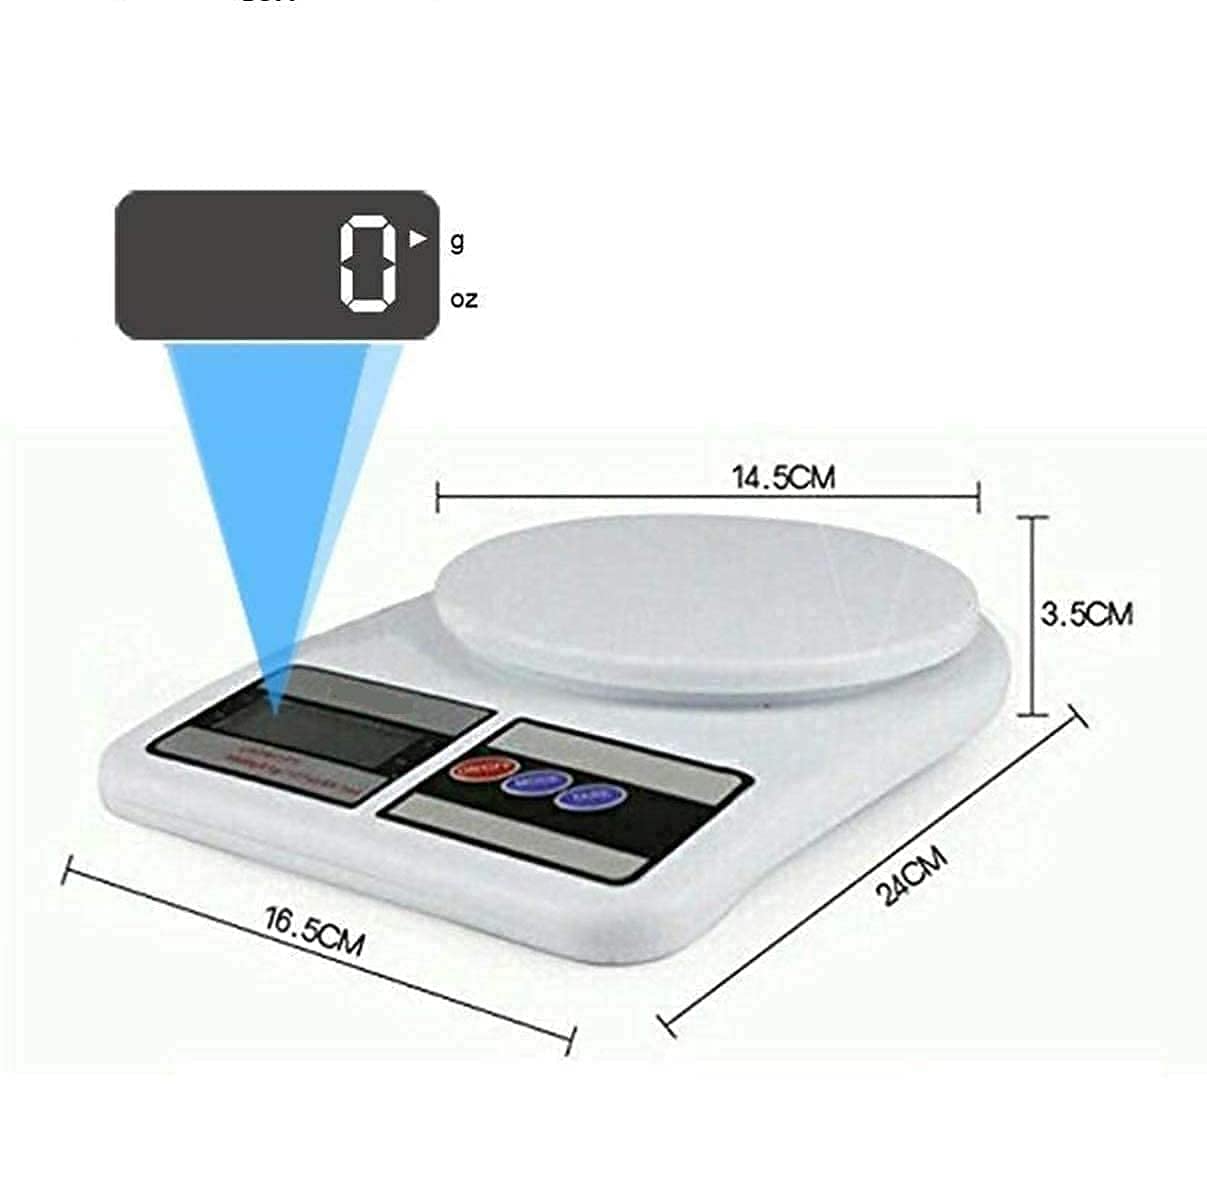 VIO Digital Kitchen Scale Multipurpose Portable Electronic Digital Weighing Scale Weight Machine With Back light LCD Display